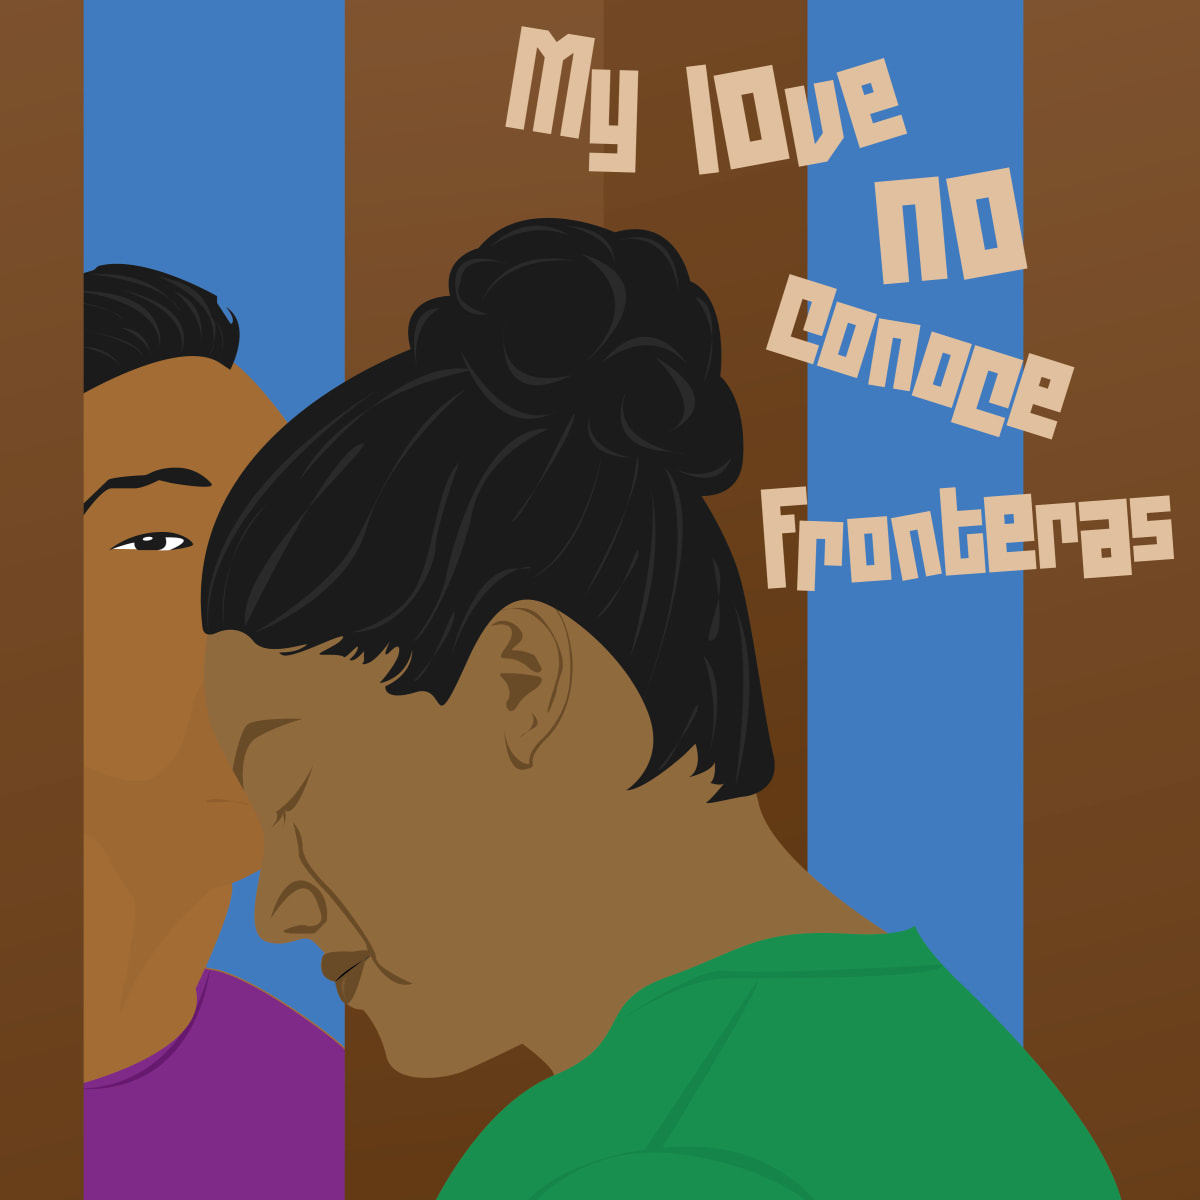 My Love no conoce fronteras  Image: Love doesn't know borders. In many situations, families taken apart suffer in many ways. Aside from increased work hours to fill in lost income, many did not have childcare to cover increased hours. Some families also faced gaps in support and care for older parents. Some people returned to an abusive relationship, suffered poor working conditions or exploitation by an employer because their income needs were so urgent and they had no other options. yet they still try to stay connected between a border and policies made by people that put a line in the dirt. Click the purchase link for size options)